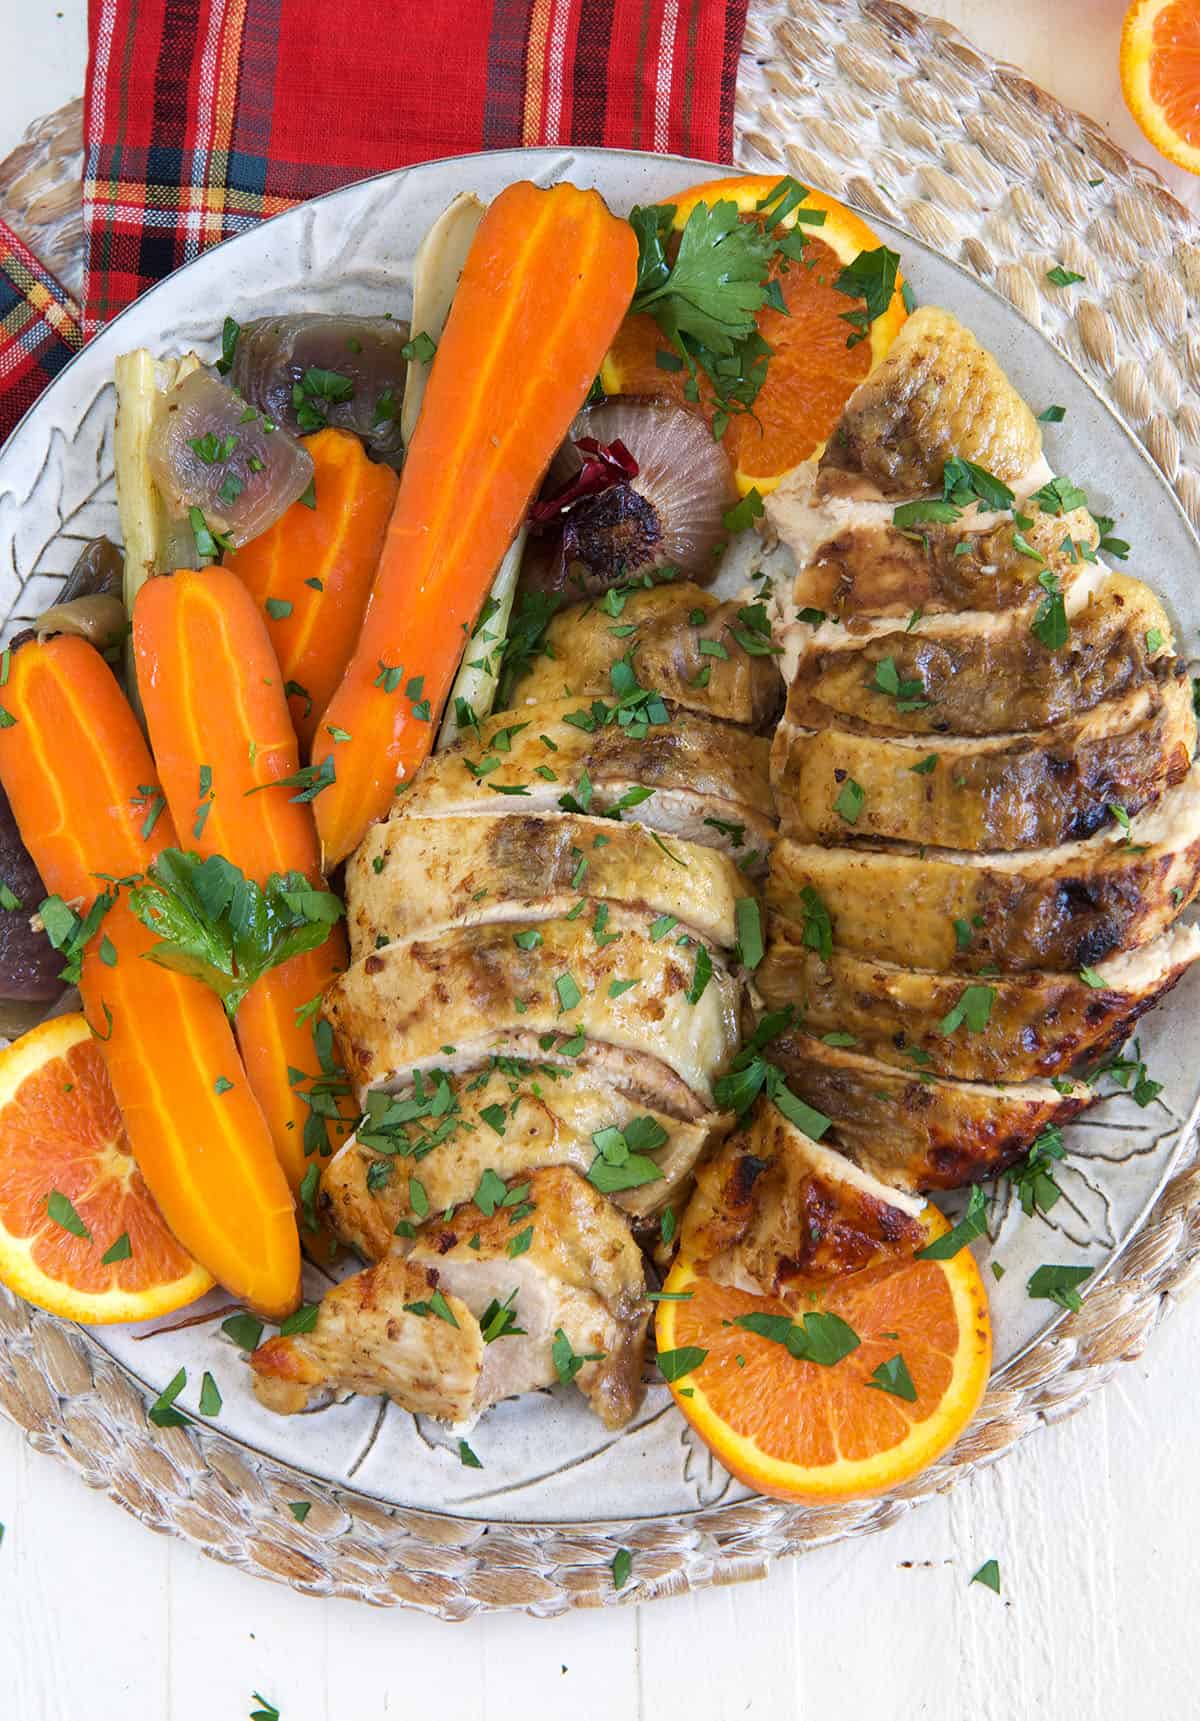 Sliced turkey breast is placed on a plate with cooked carrots.